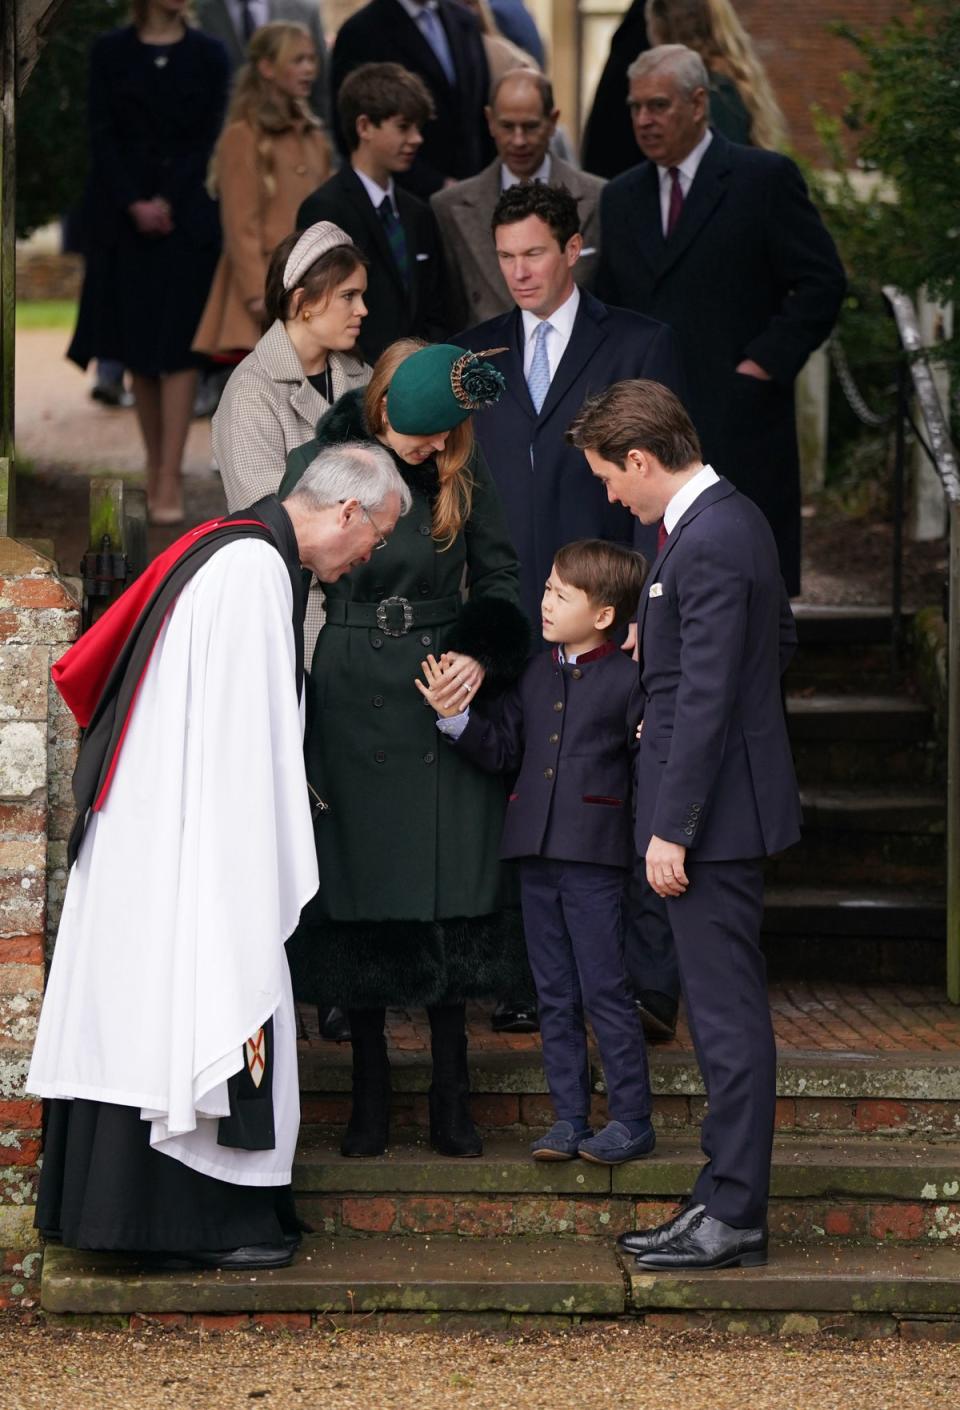 Princess Beatrice, Christopher Woolf, and Edoardo Mapelli Mozzi, (centre) Princess Eugenie and Jack Brooksbank, (back) James, Visount Severn, the Earl of Wessex and the Duke of York attending the Christmas Day morning church service at St Mary Magdalene Church (PA)